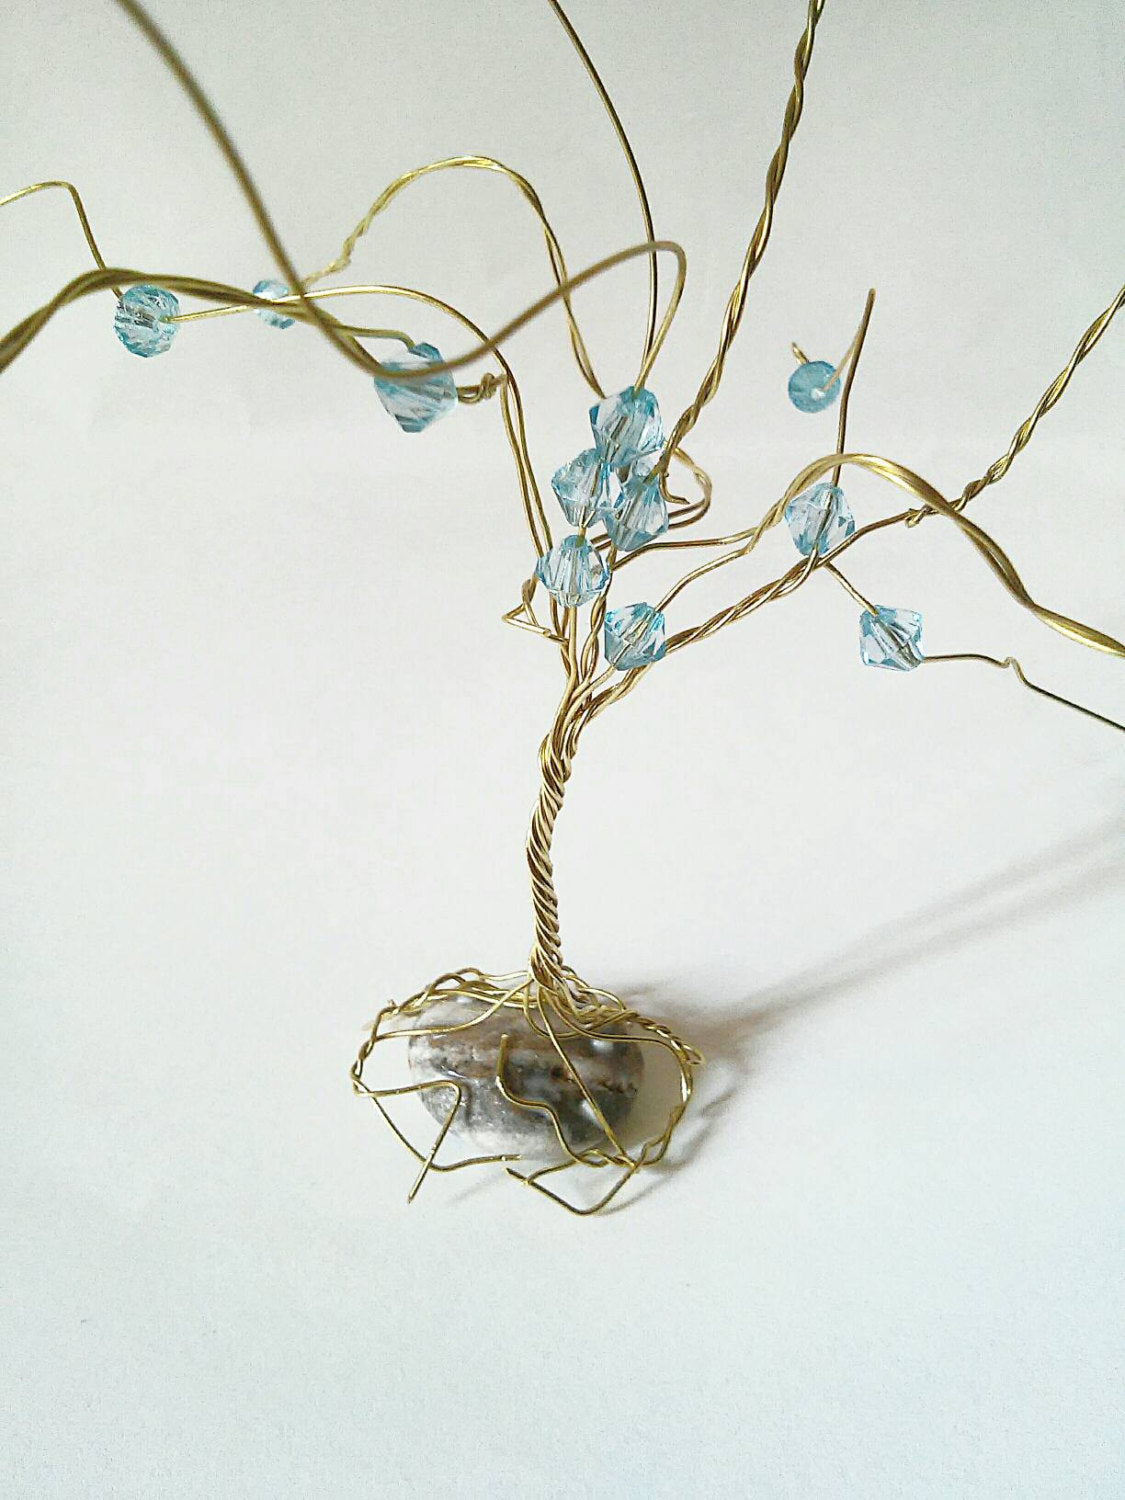 Gold wire decor tree of life with beads, wire decor tree, boho wire tree, home decor wire tree, gold wire sculpture tree, gold tree of life